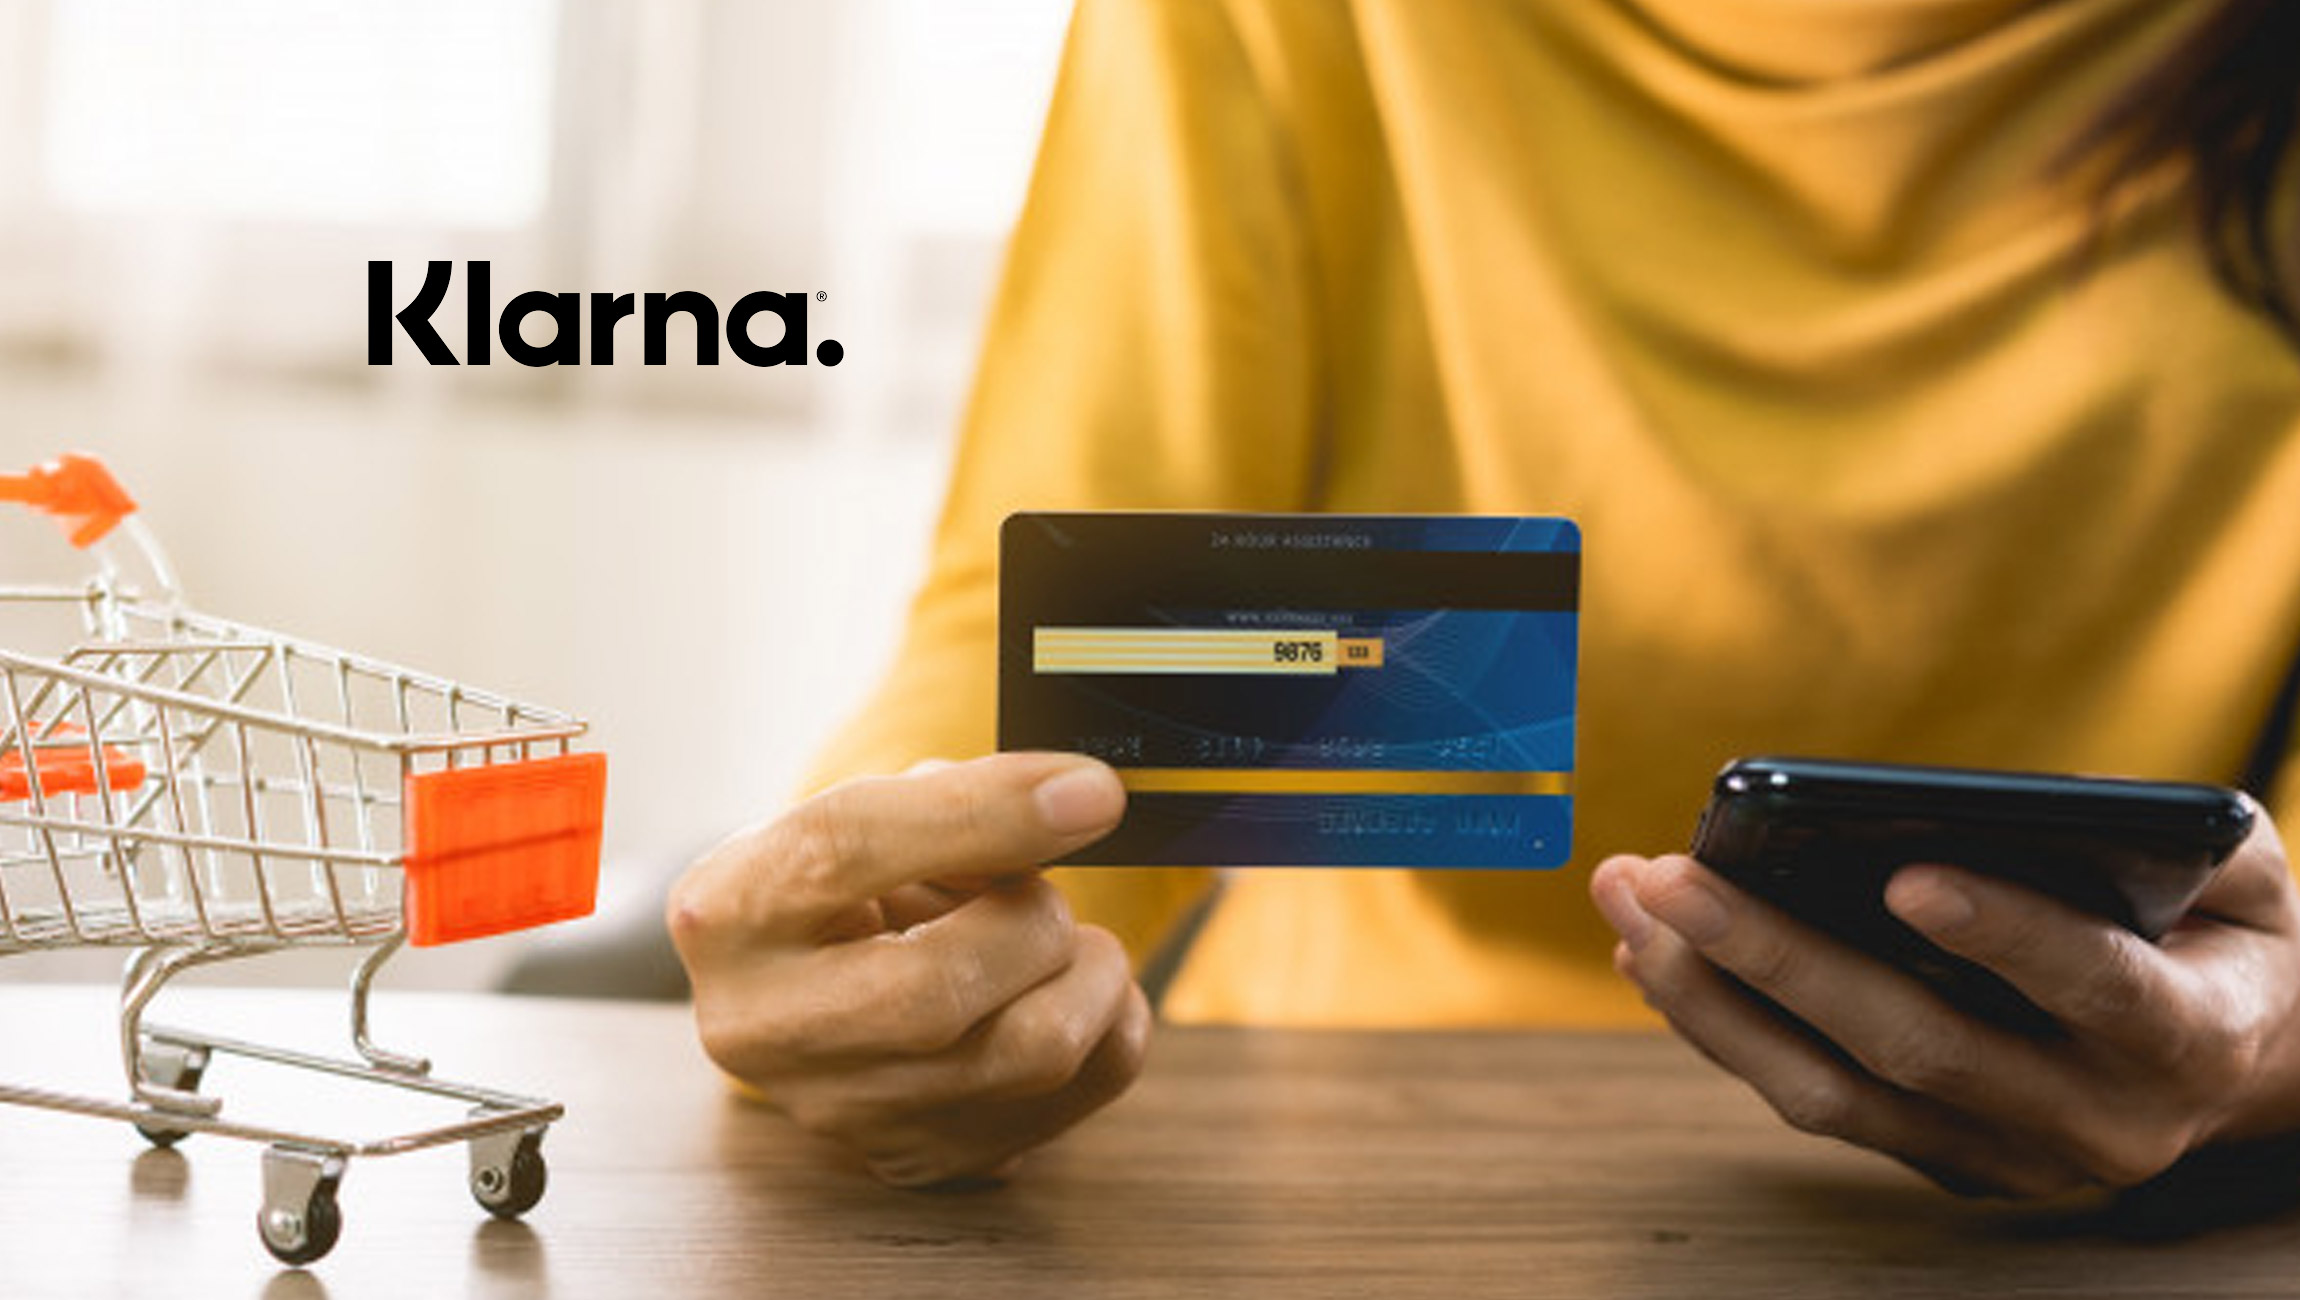 Klarna annual trend report reveals 'nostalgia' as key shopping theme for 2022 as consumers turn to products reflective of more carefree times